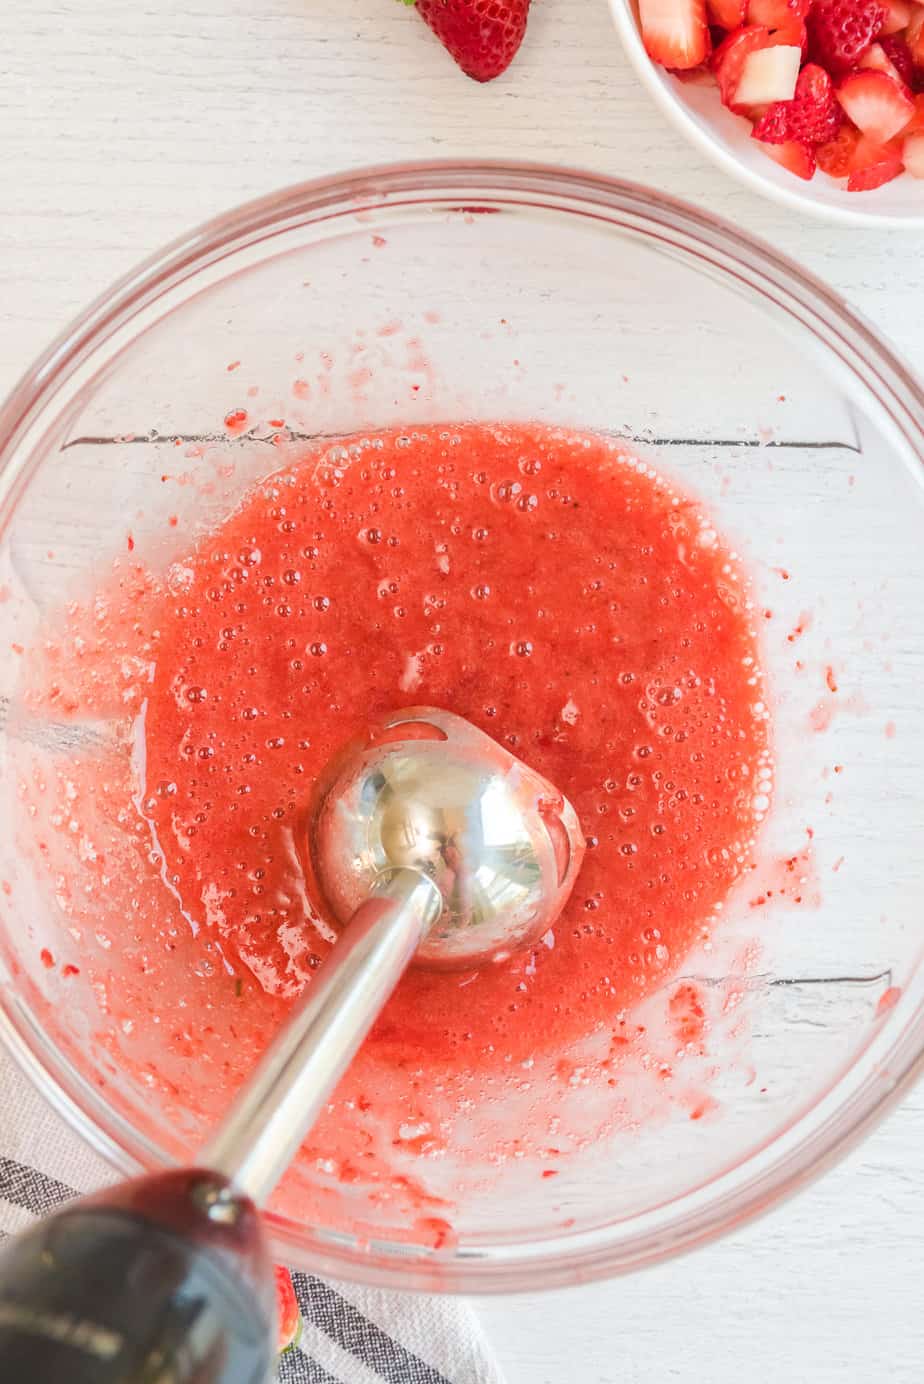 Blending cooked strawberries in a large bowl with an immersion blender from above.